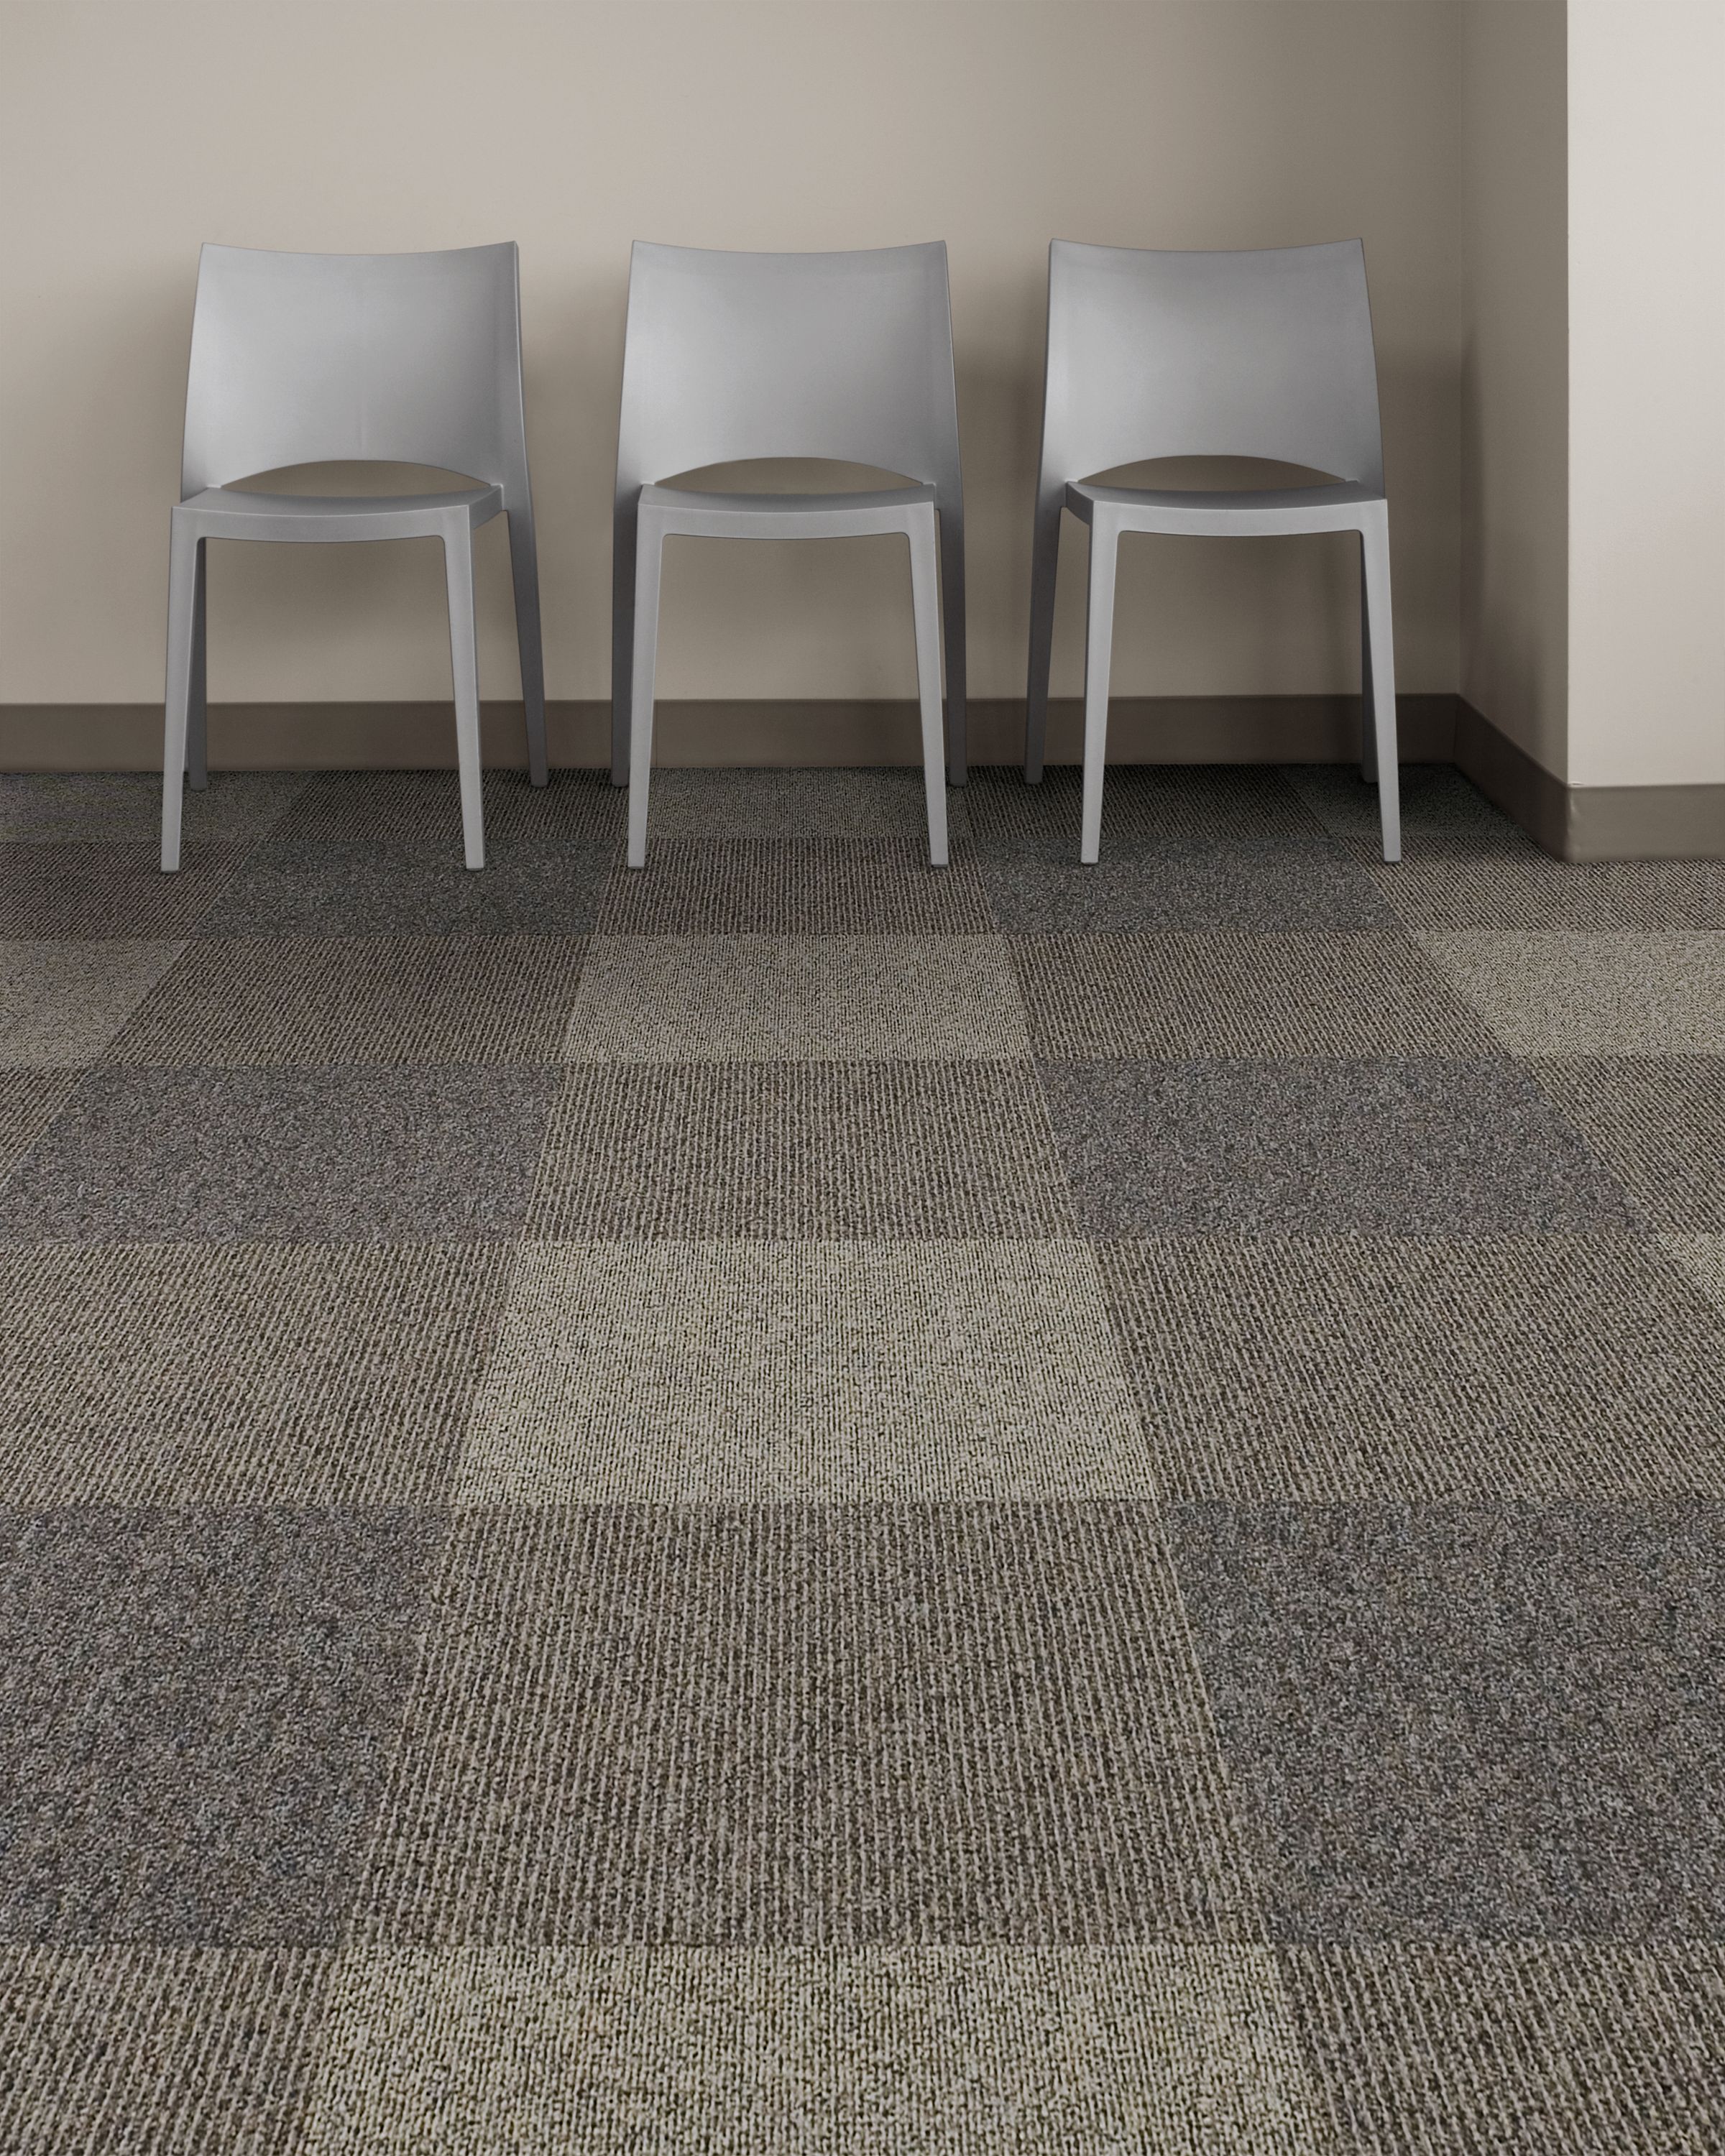 Interface Broomed, Grooved and Brushed carpet tile in room with three chairs image number 5